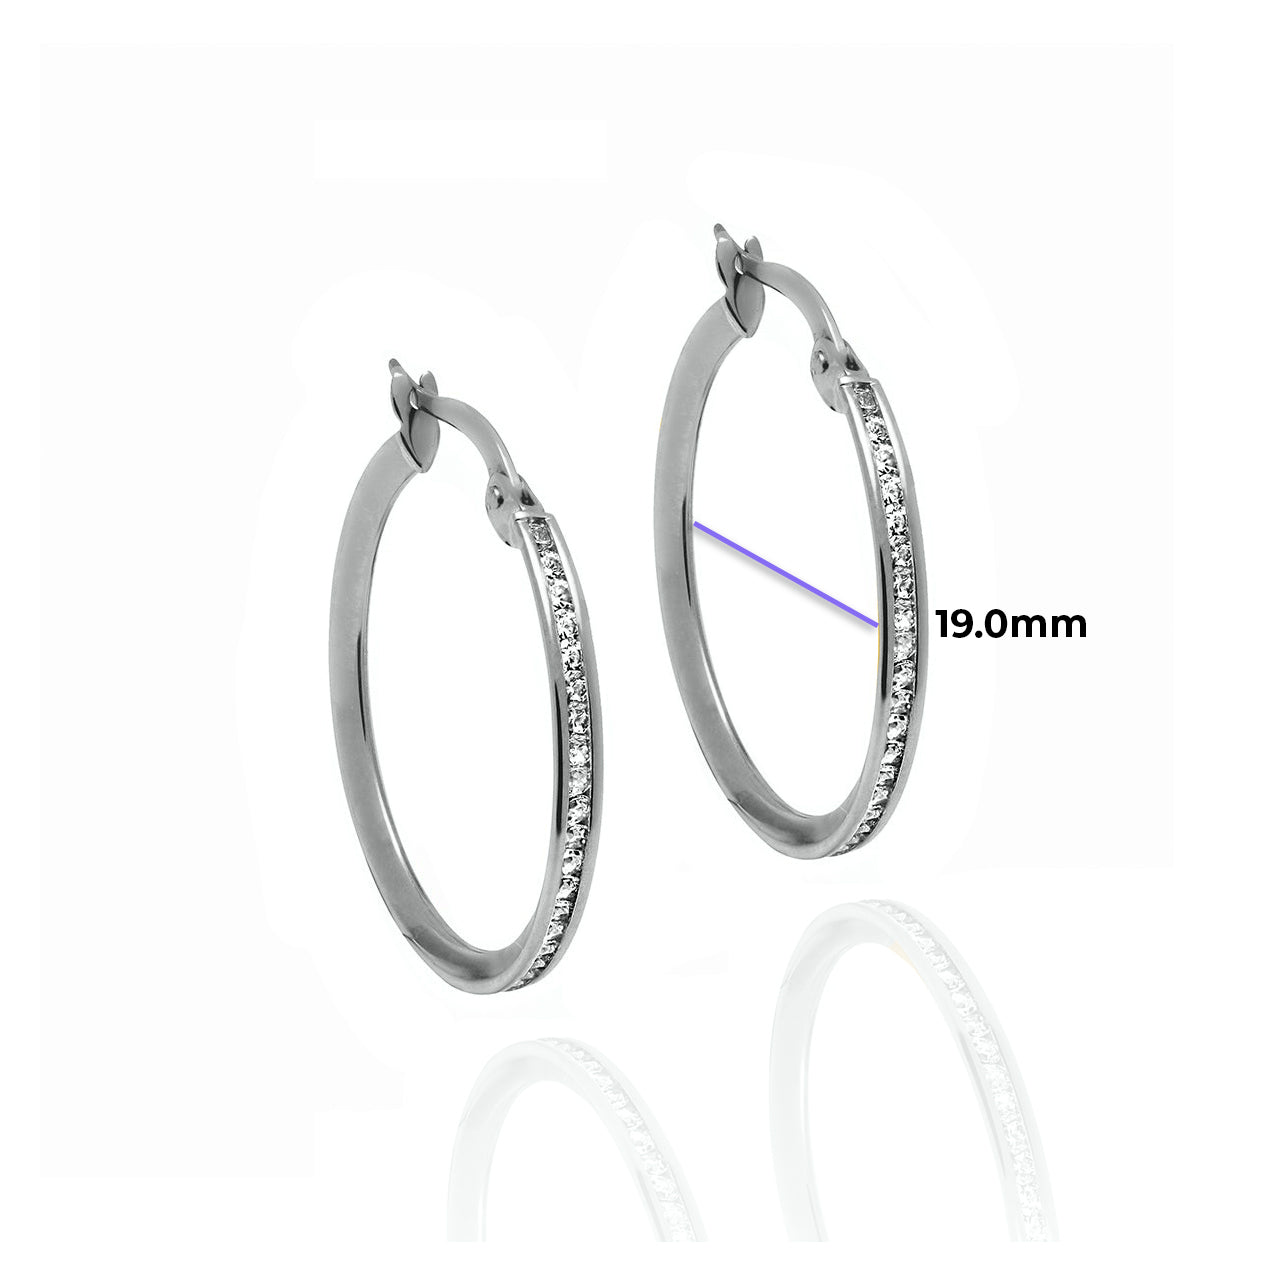 Large Crystal Hoops 2mm Width Solid Gold with Cubic Zirconia White with Measurement 19mm